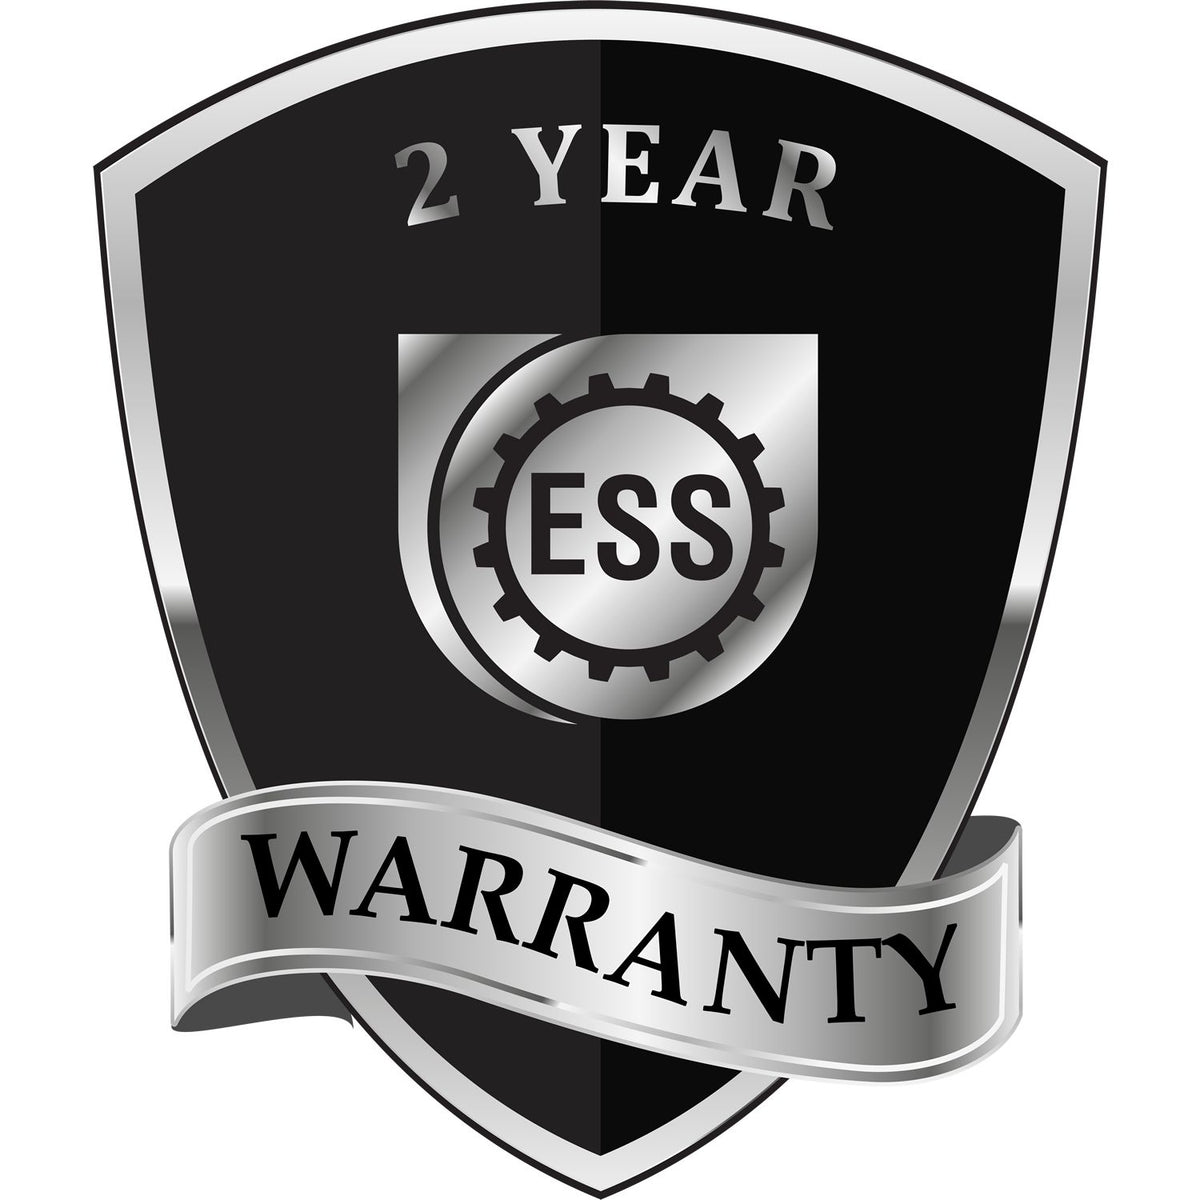 A black and silver badge or emblem showing warranty information for the Soft North Dakota Professional Geologist Seal